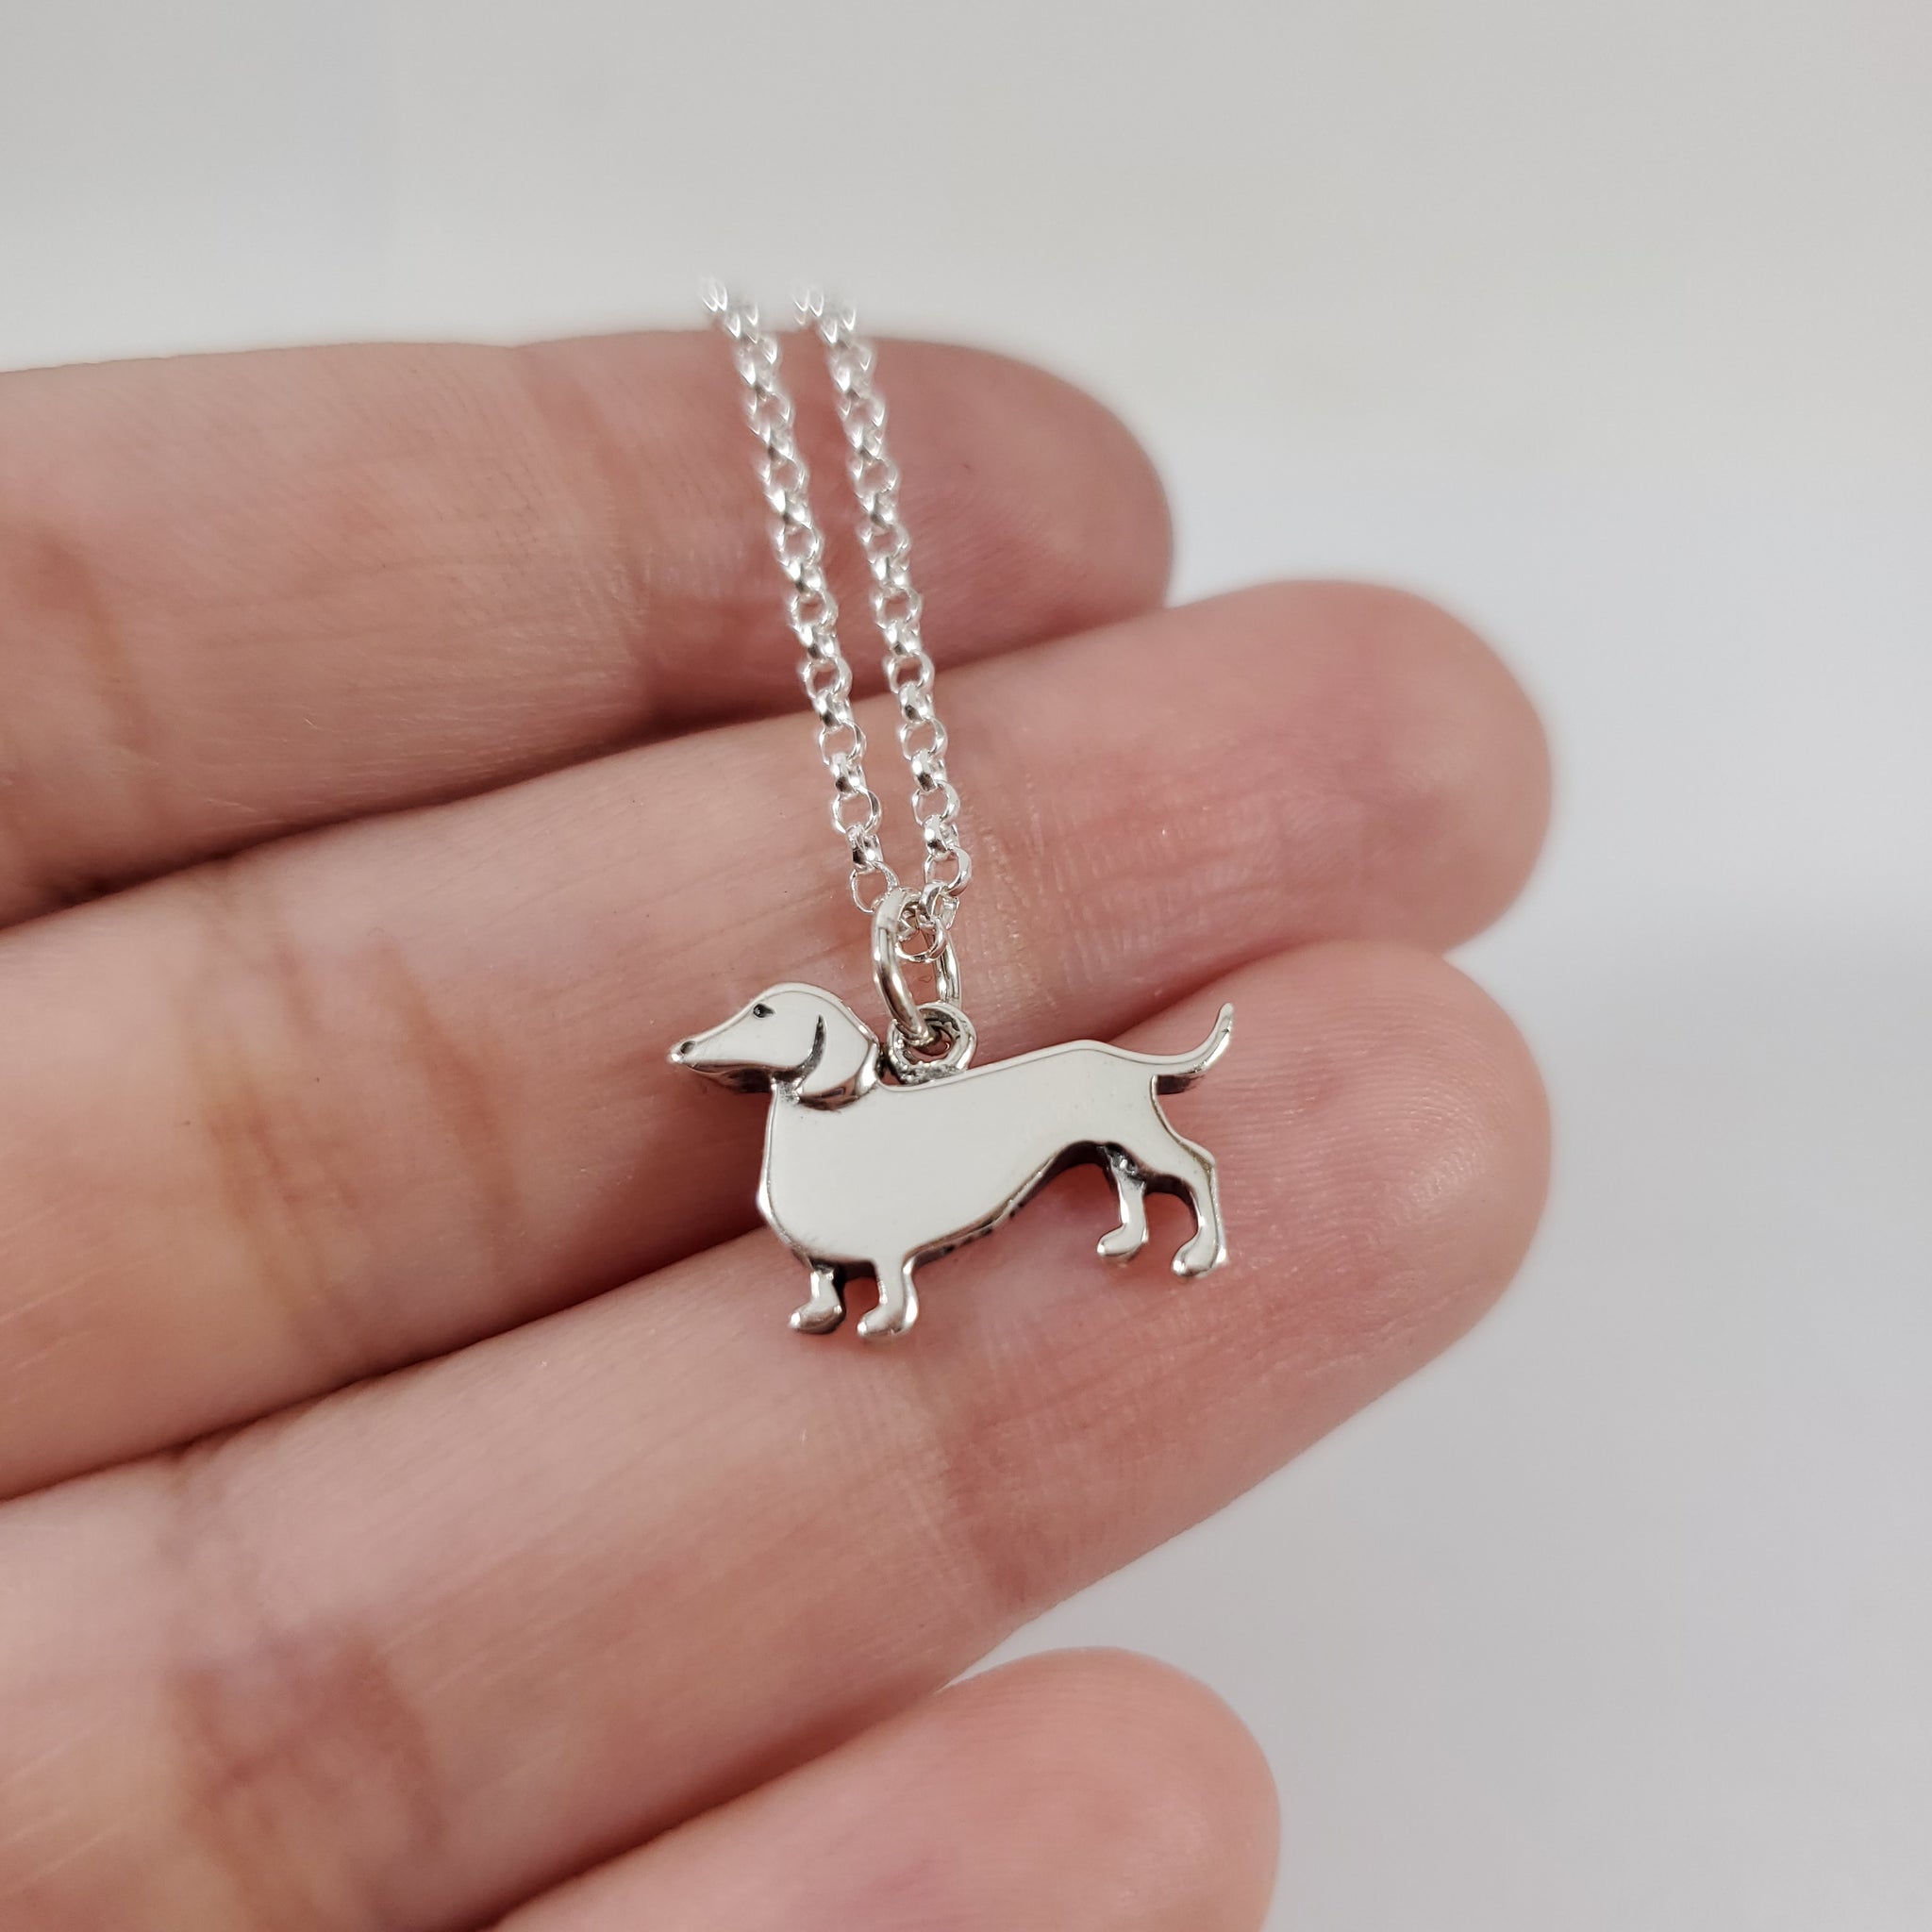 Buy Gold Sausage Dog Necklace, Cute Dachshund Pendant Necklace, Animal  Necklace, Tiny 3d Charm Necklace, Whimsical Quirky Gifts, Dog Lover Gift  Online in India - Etsy